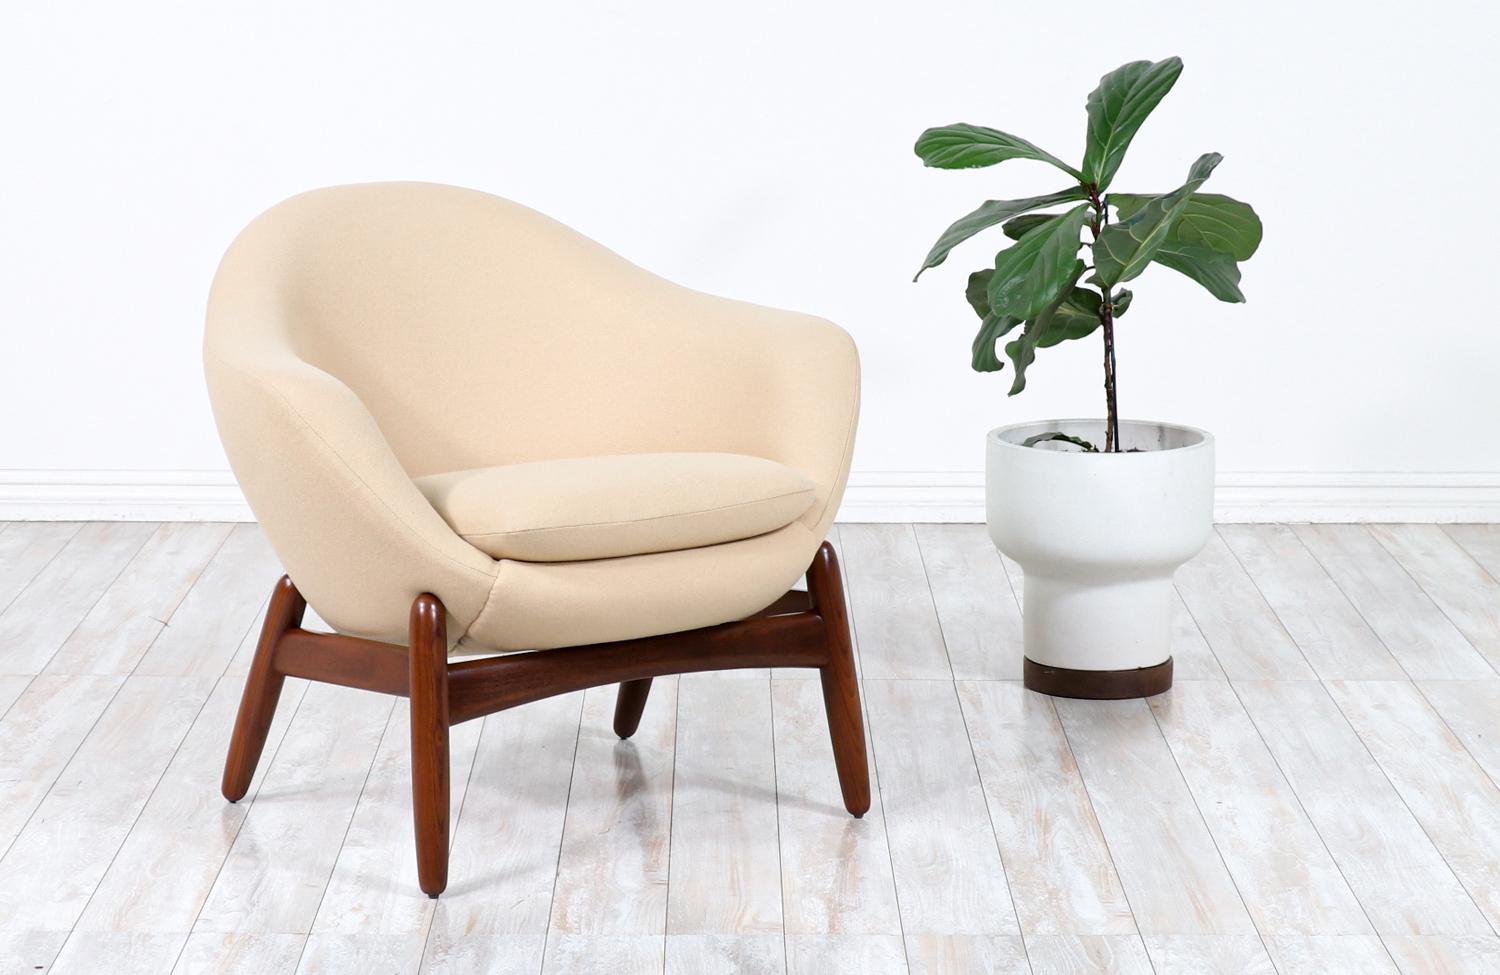 Loung chair designed by Ib Kofod Larsen for cabinetmaker Povl Dinesen in Denmark circa 1950’s. This fantastic rare “Pod” design by Larsen features an Afomosia teak frame with angled conical legs. The pod, which appears to float upon the base, is